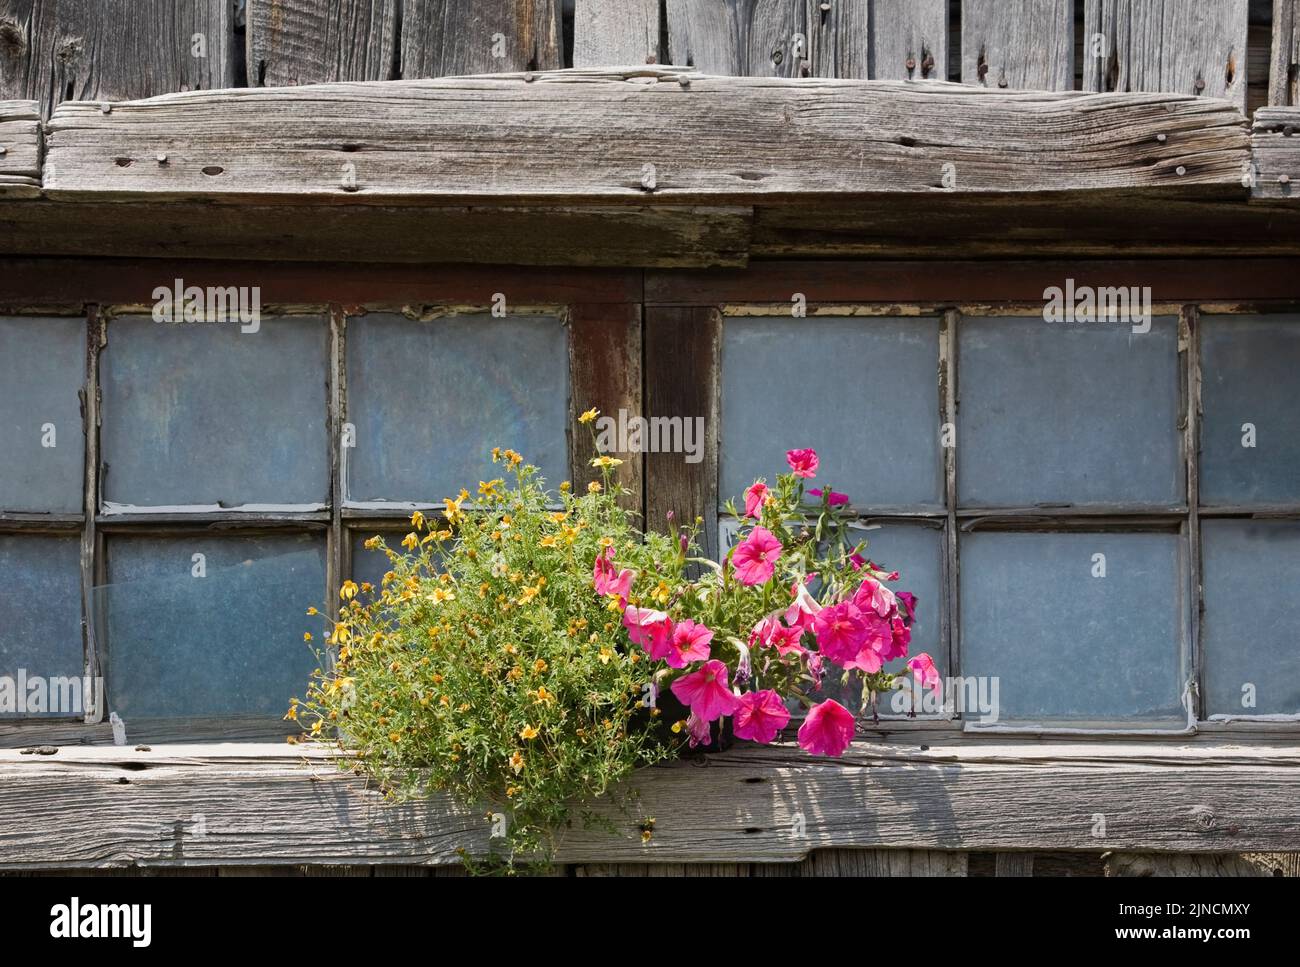 Old wooden barn window with a flower pot of petunias and yellow flowers on the window sill, Quebec, Canada Stock Photo